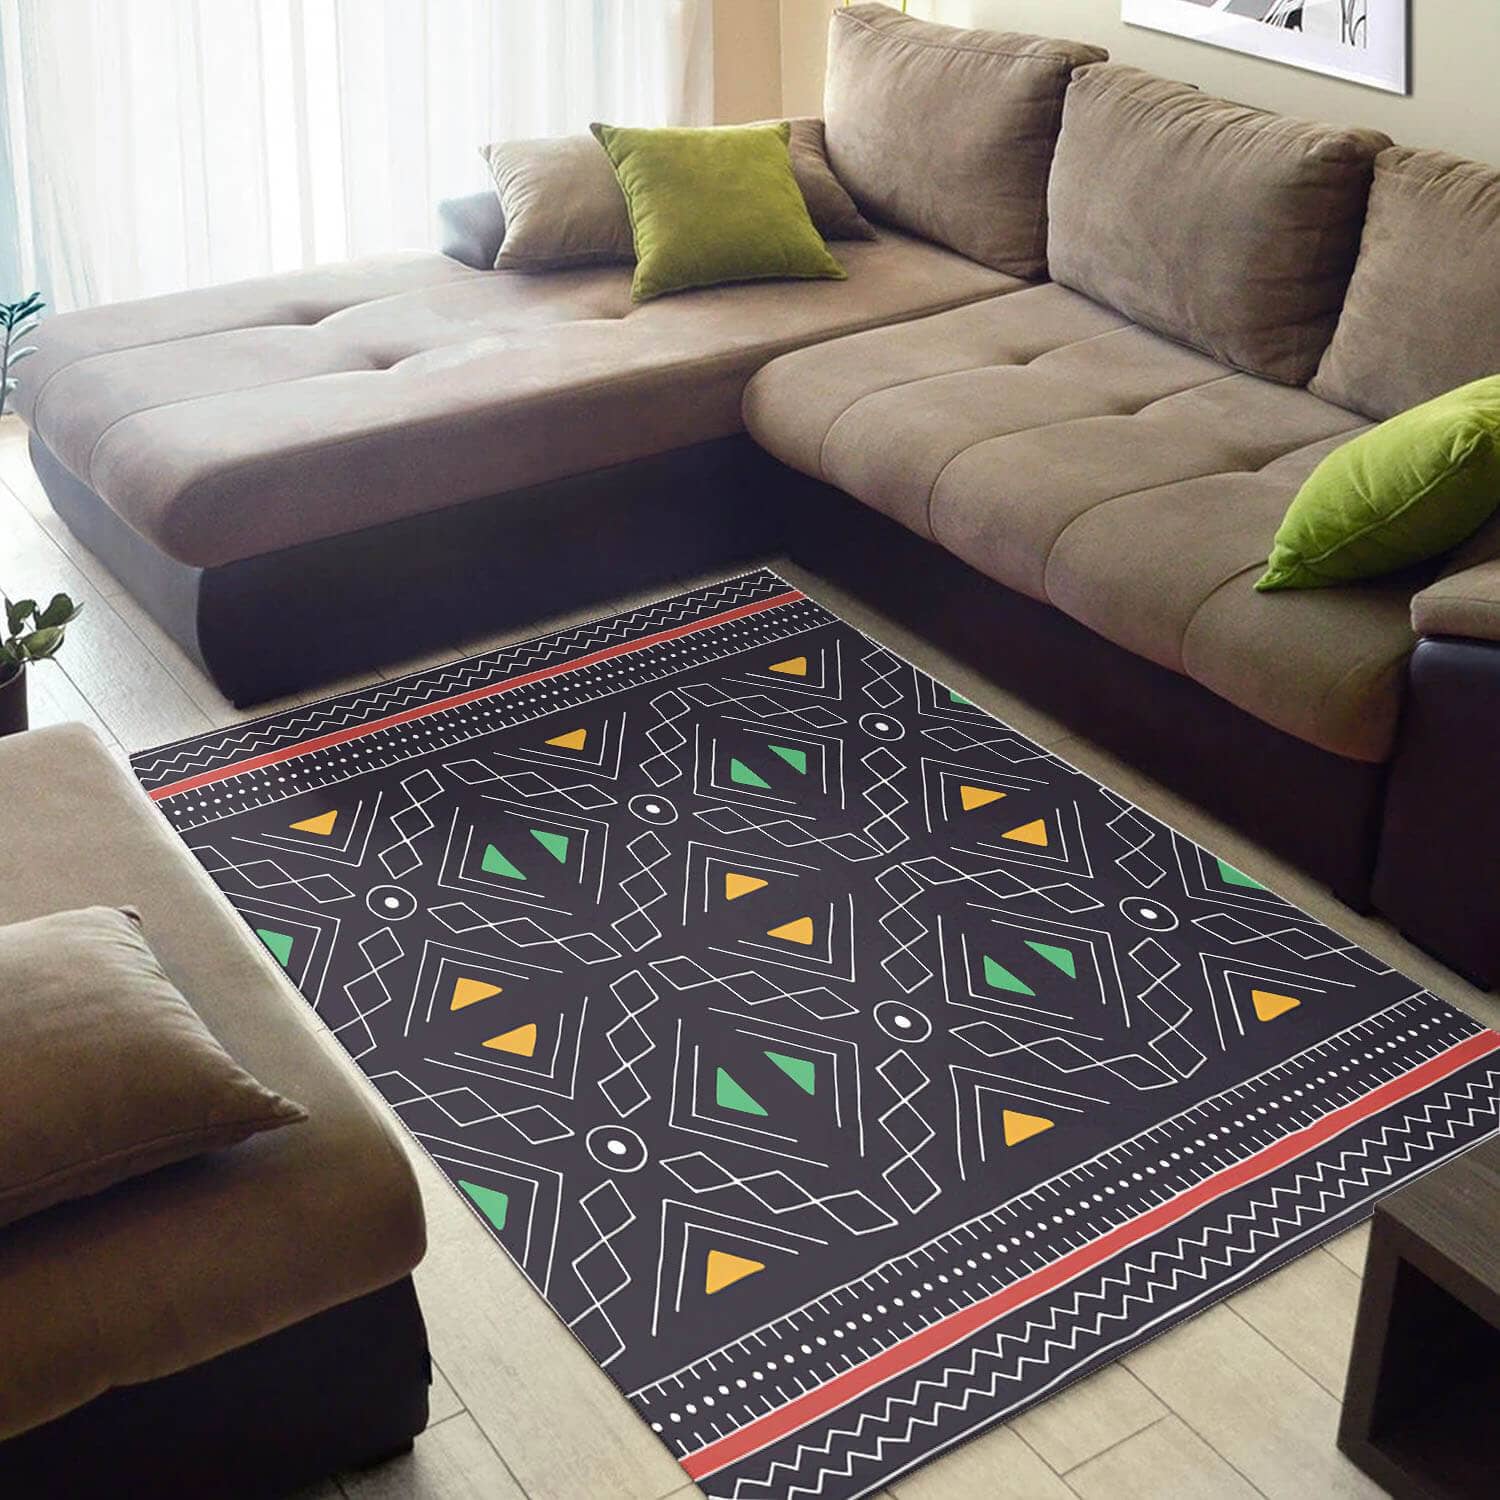 Nice African Cool Afro American Ethnic Seamless Pattern Themed Inspired Living Room Rug